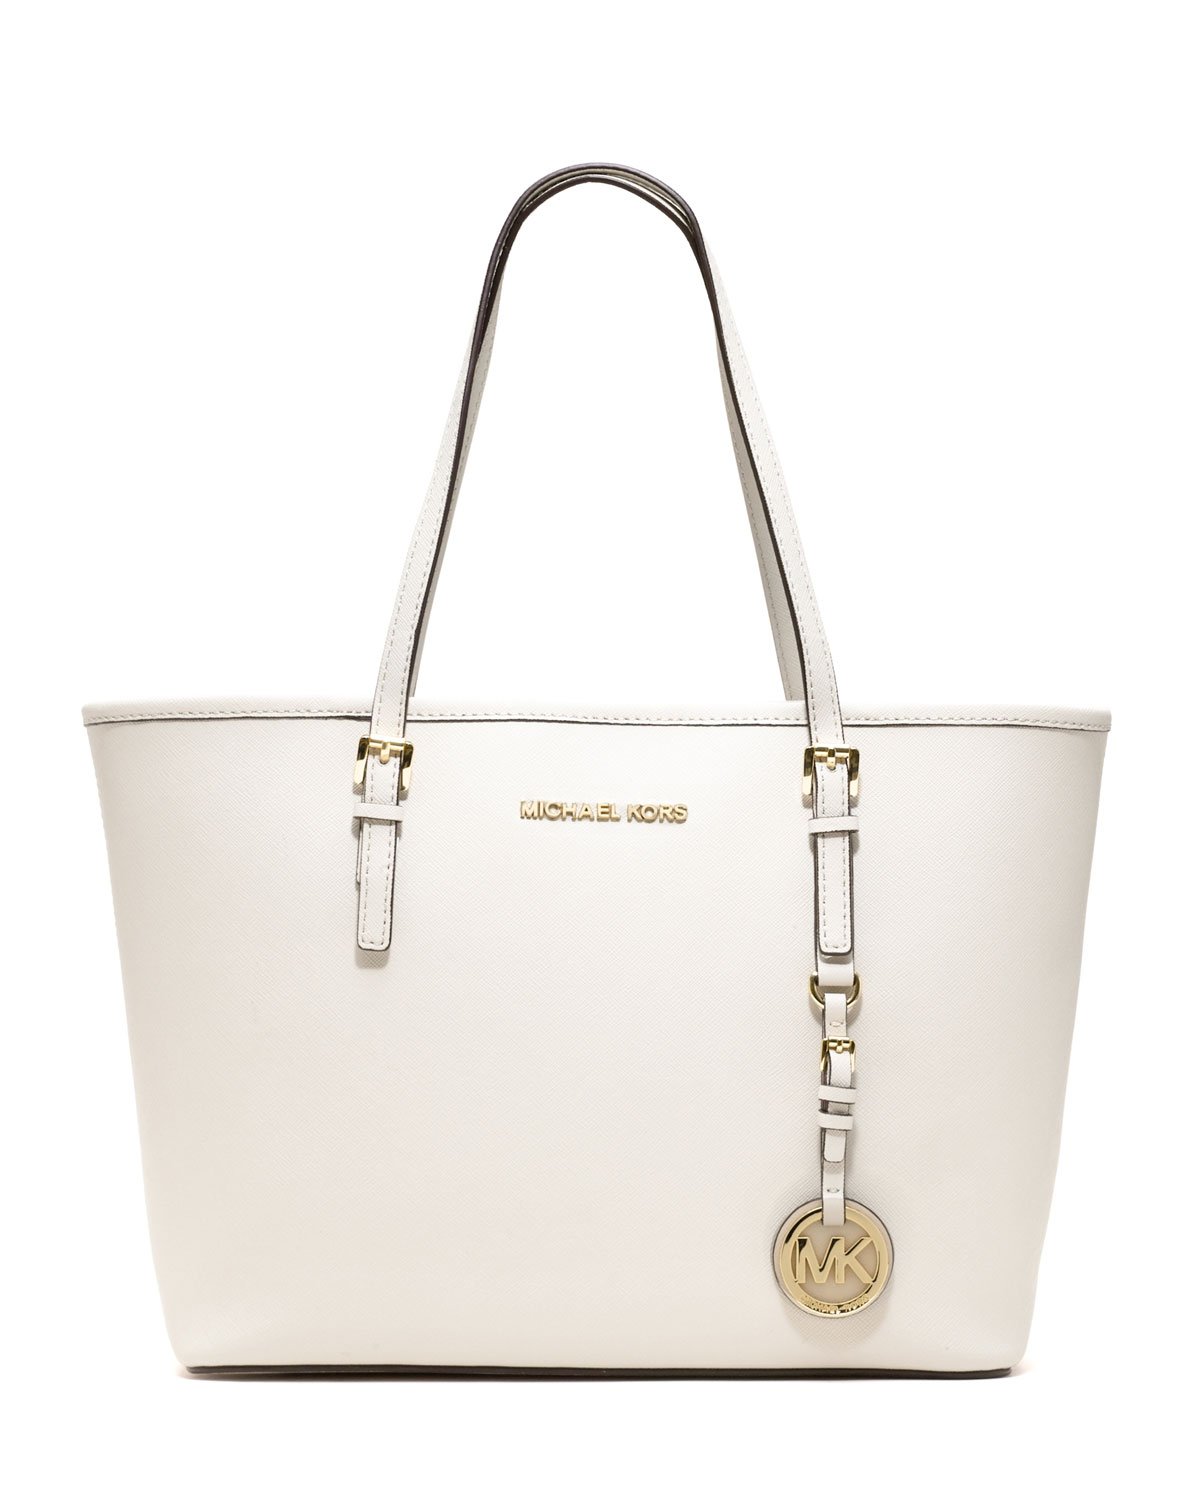 Michael Kors Michael Jet Set Small Saffiano Travel Tote in White - Lyst